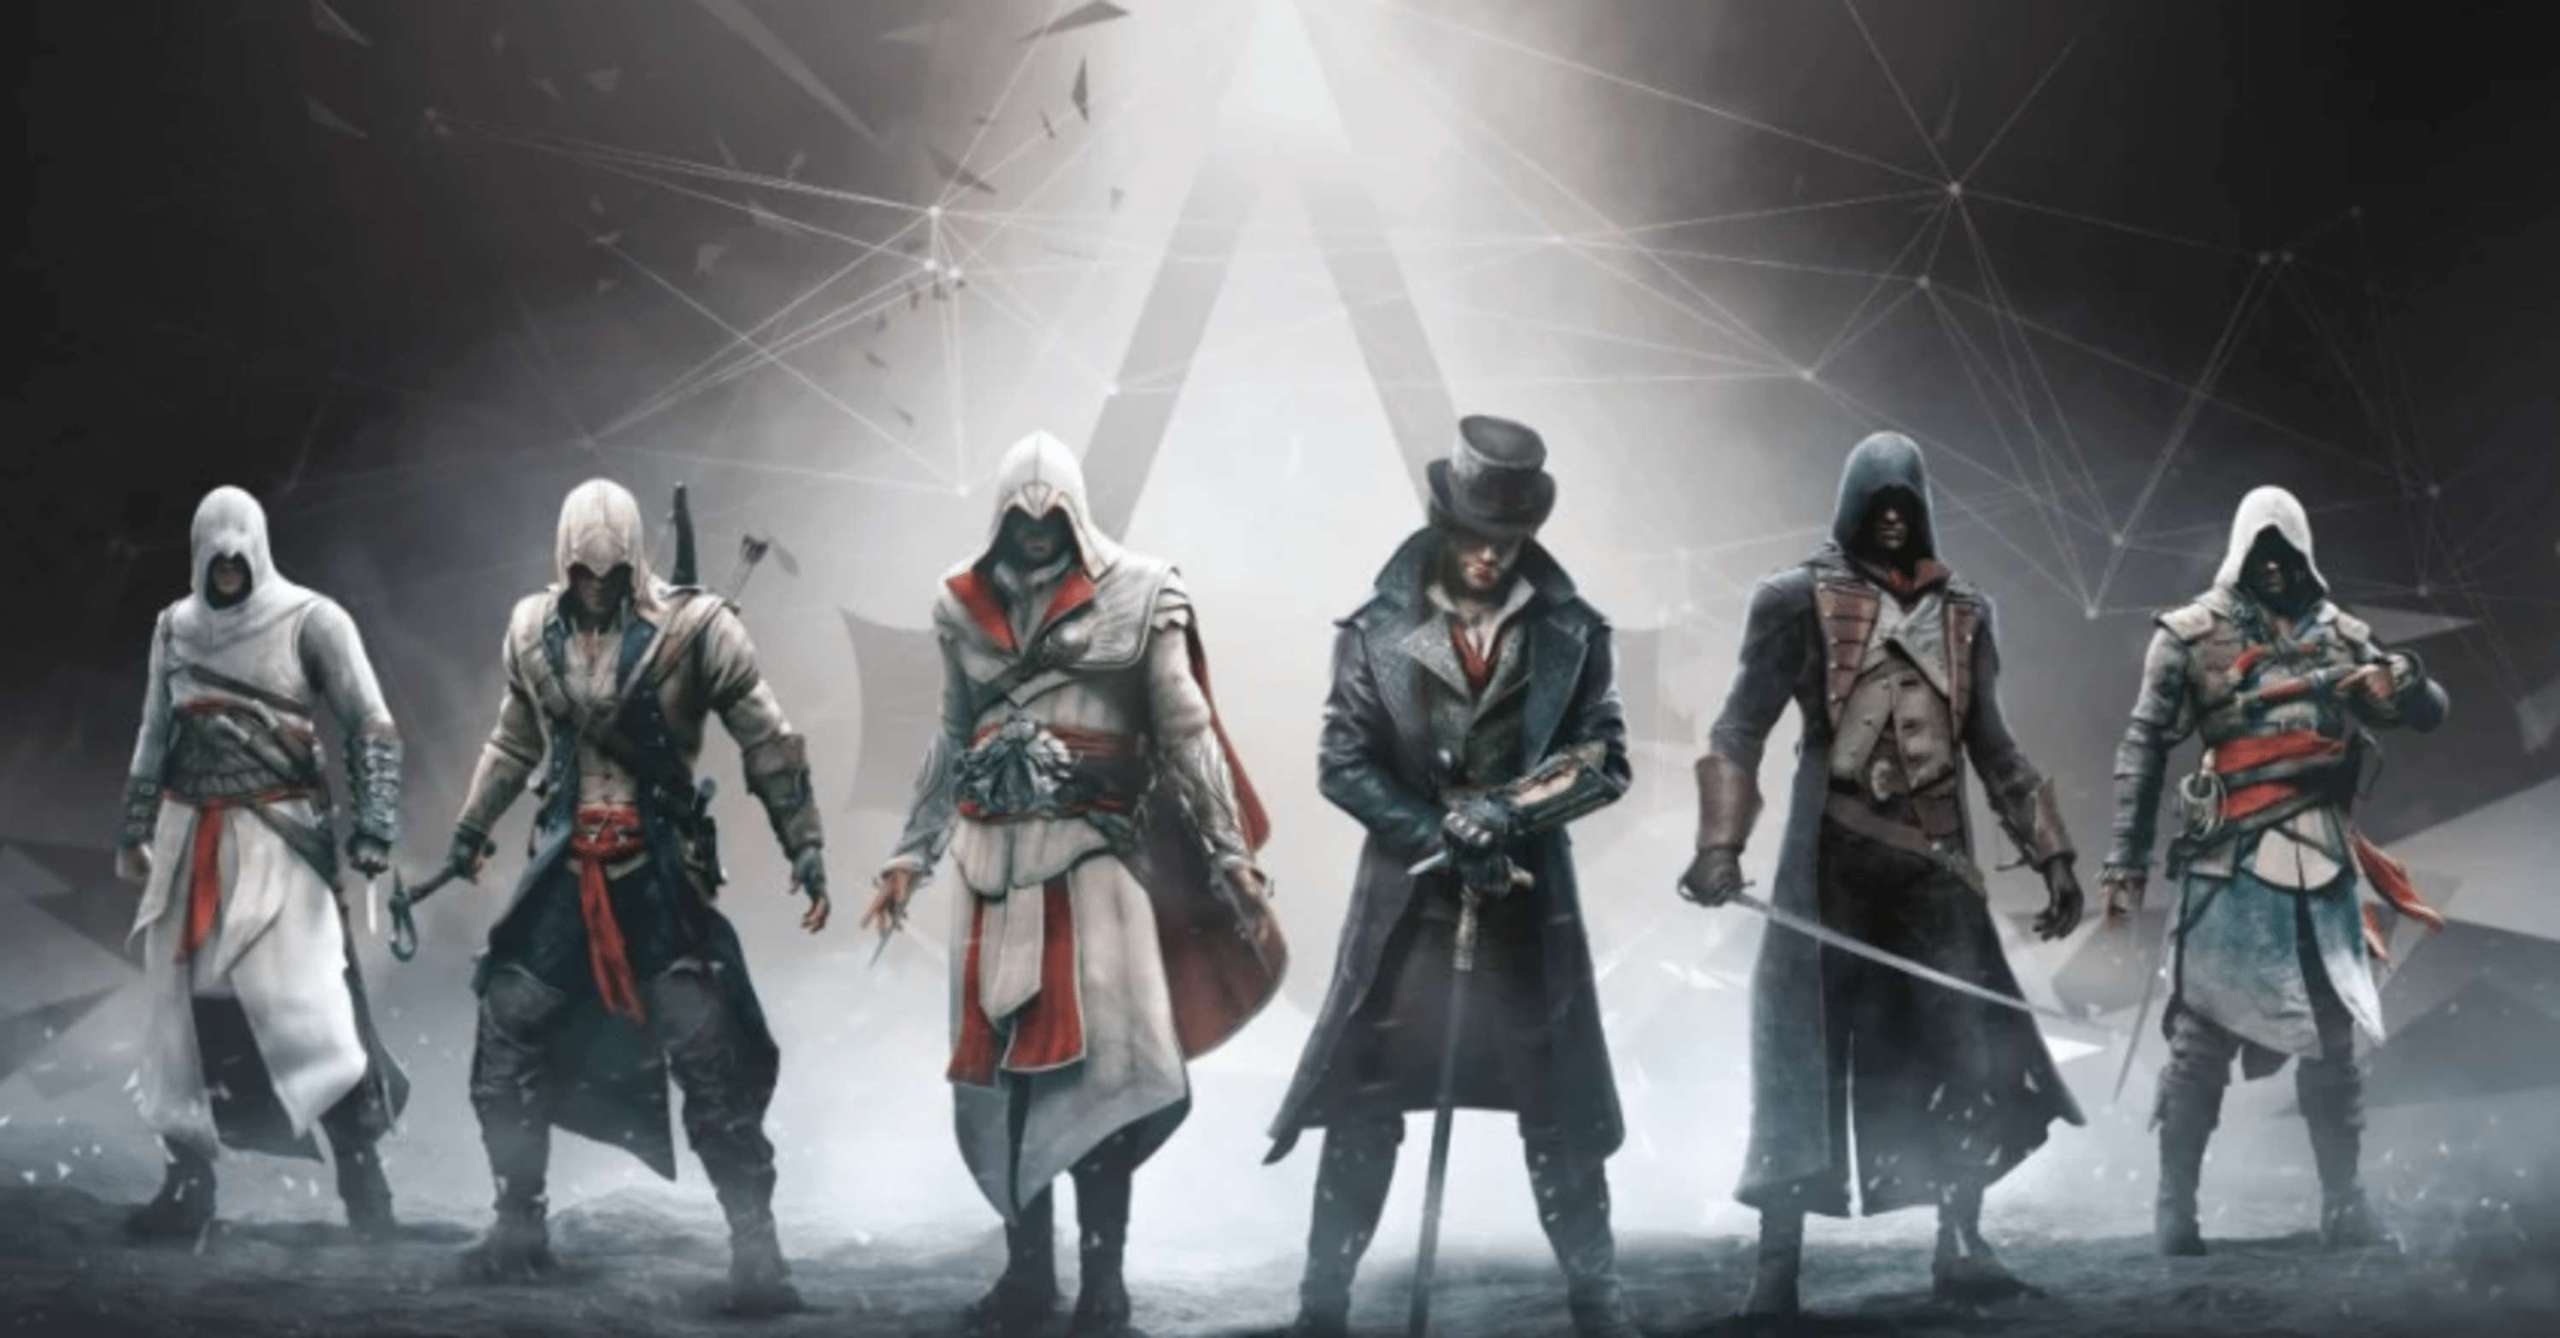 This Weekend, Ubisoft Is Rumored To Have A Product Showcase Where Many Assassin’s Creed Titles Would Be Unveiled